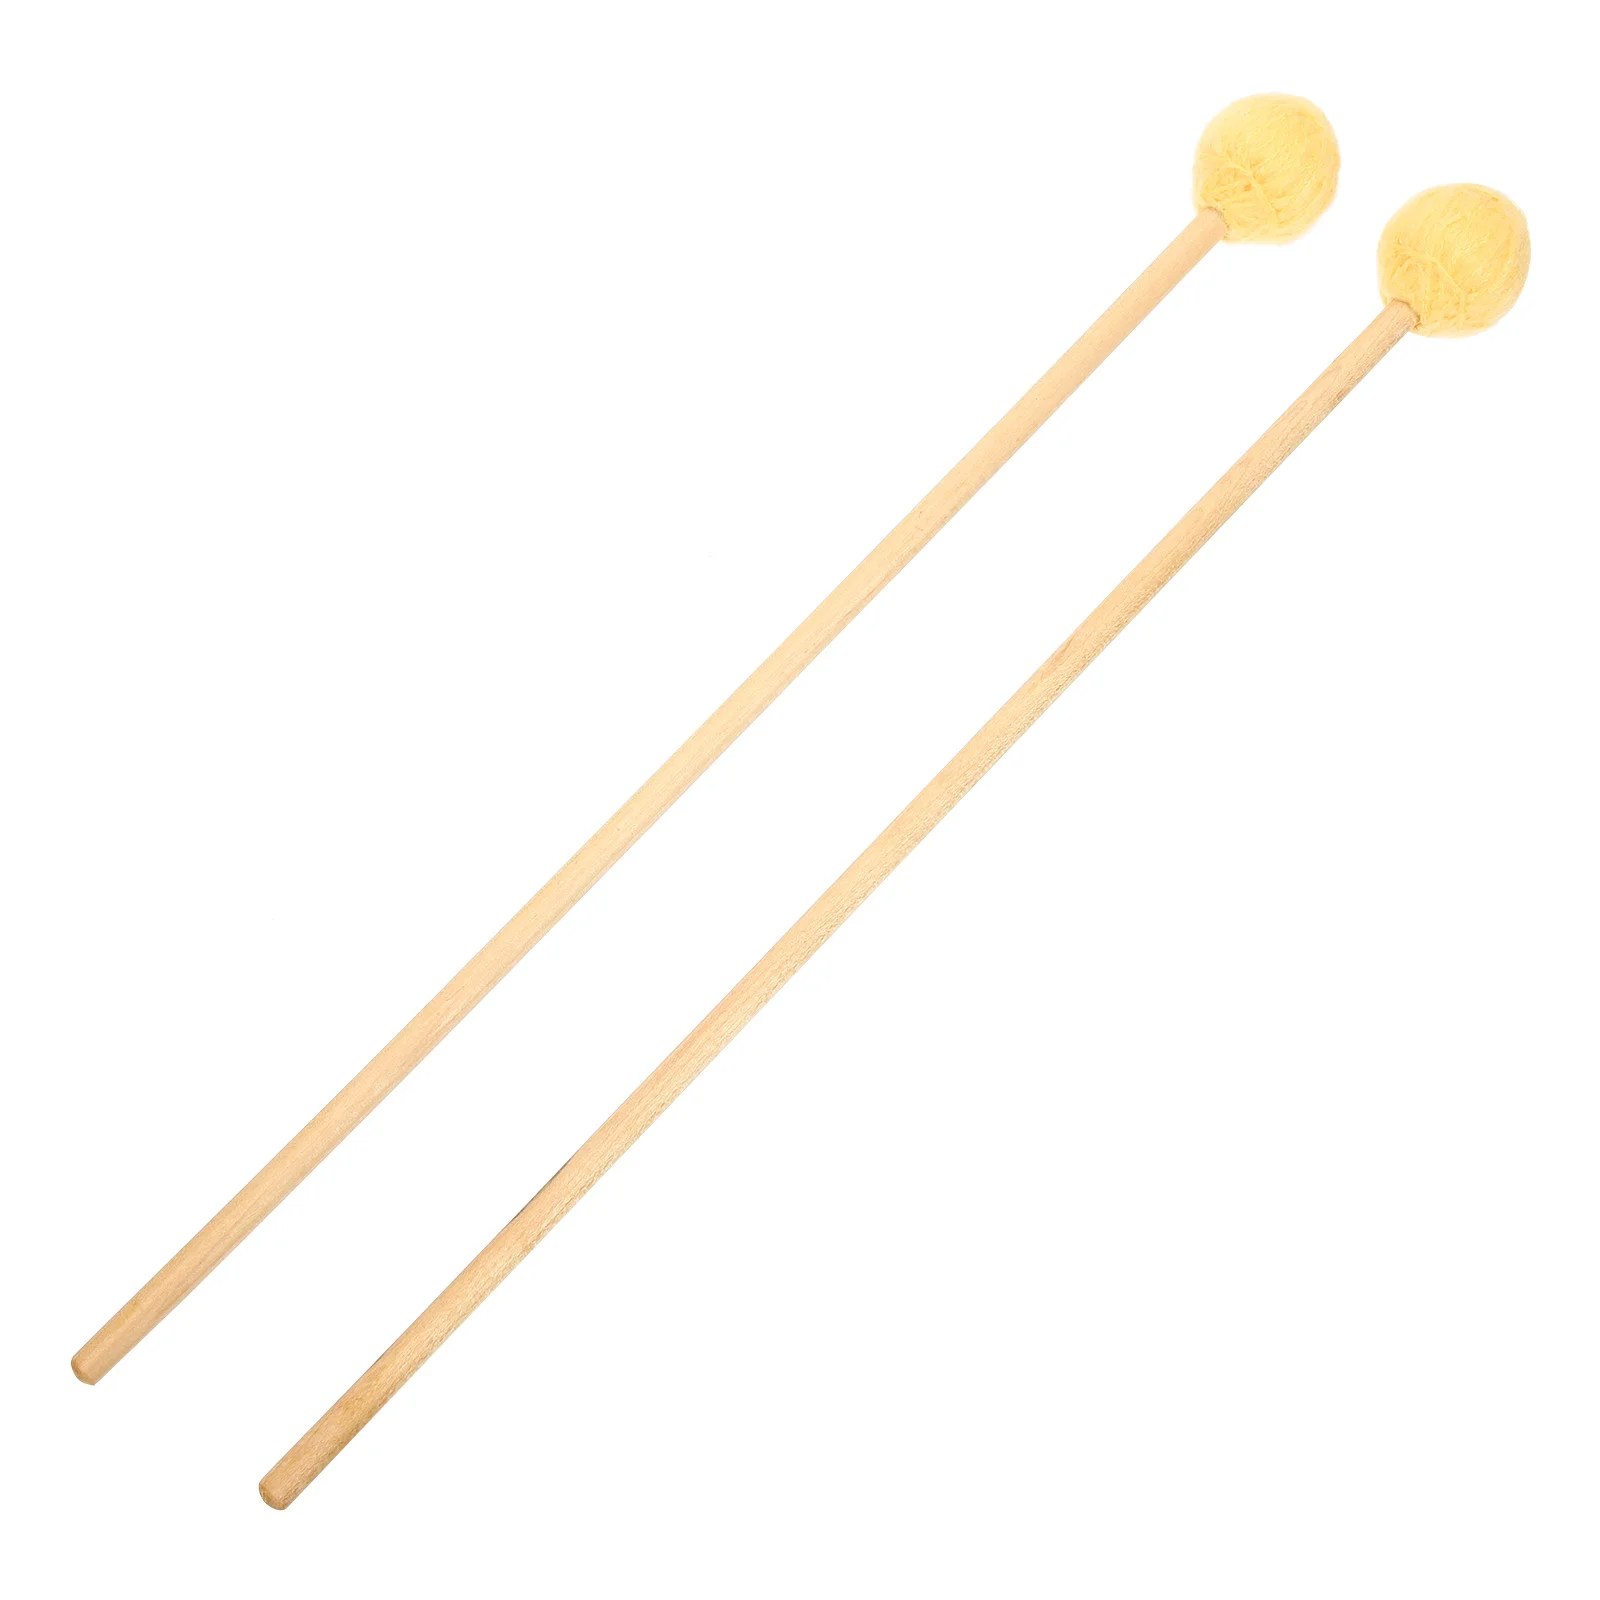 

Mallets Drum Tongue Marimba Mallet Percussion Wooden Rubber Stick Drumstick Xylophone Universal Musical Instrument Performance